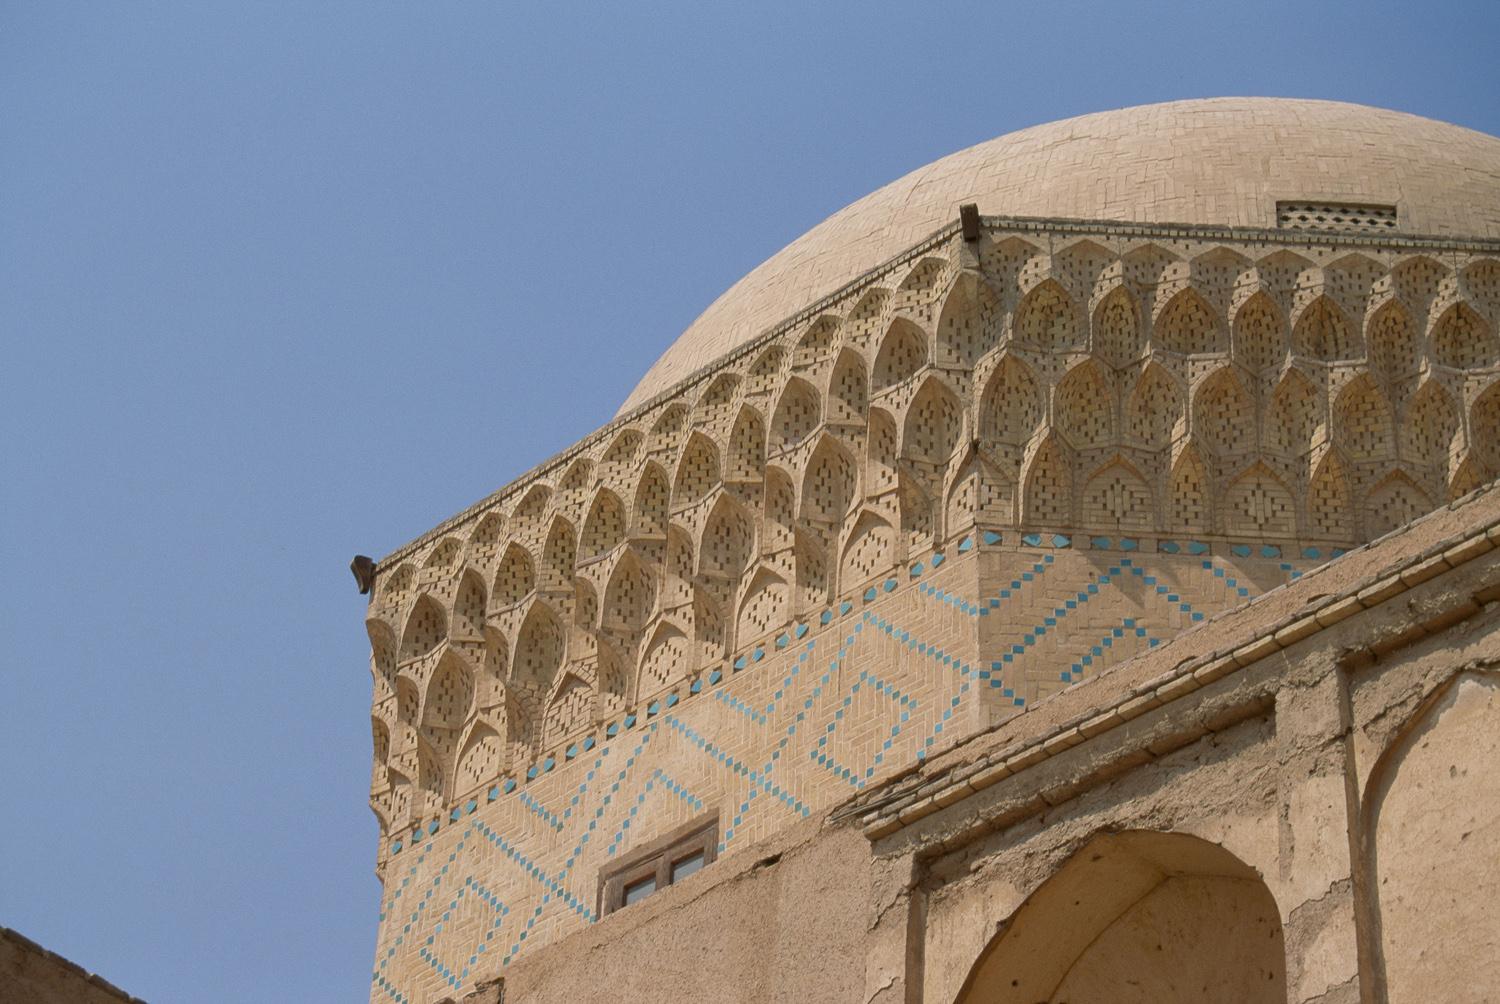 Detail view of the dome